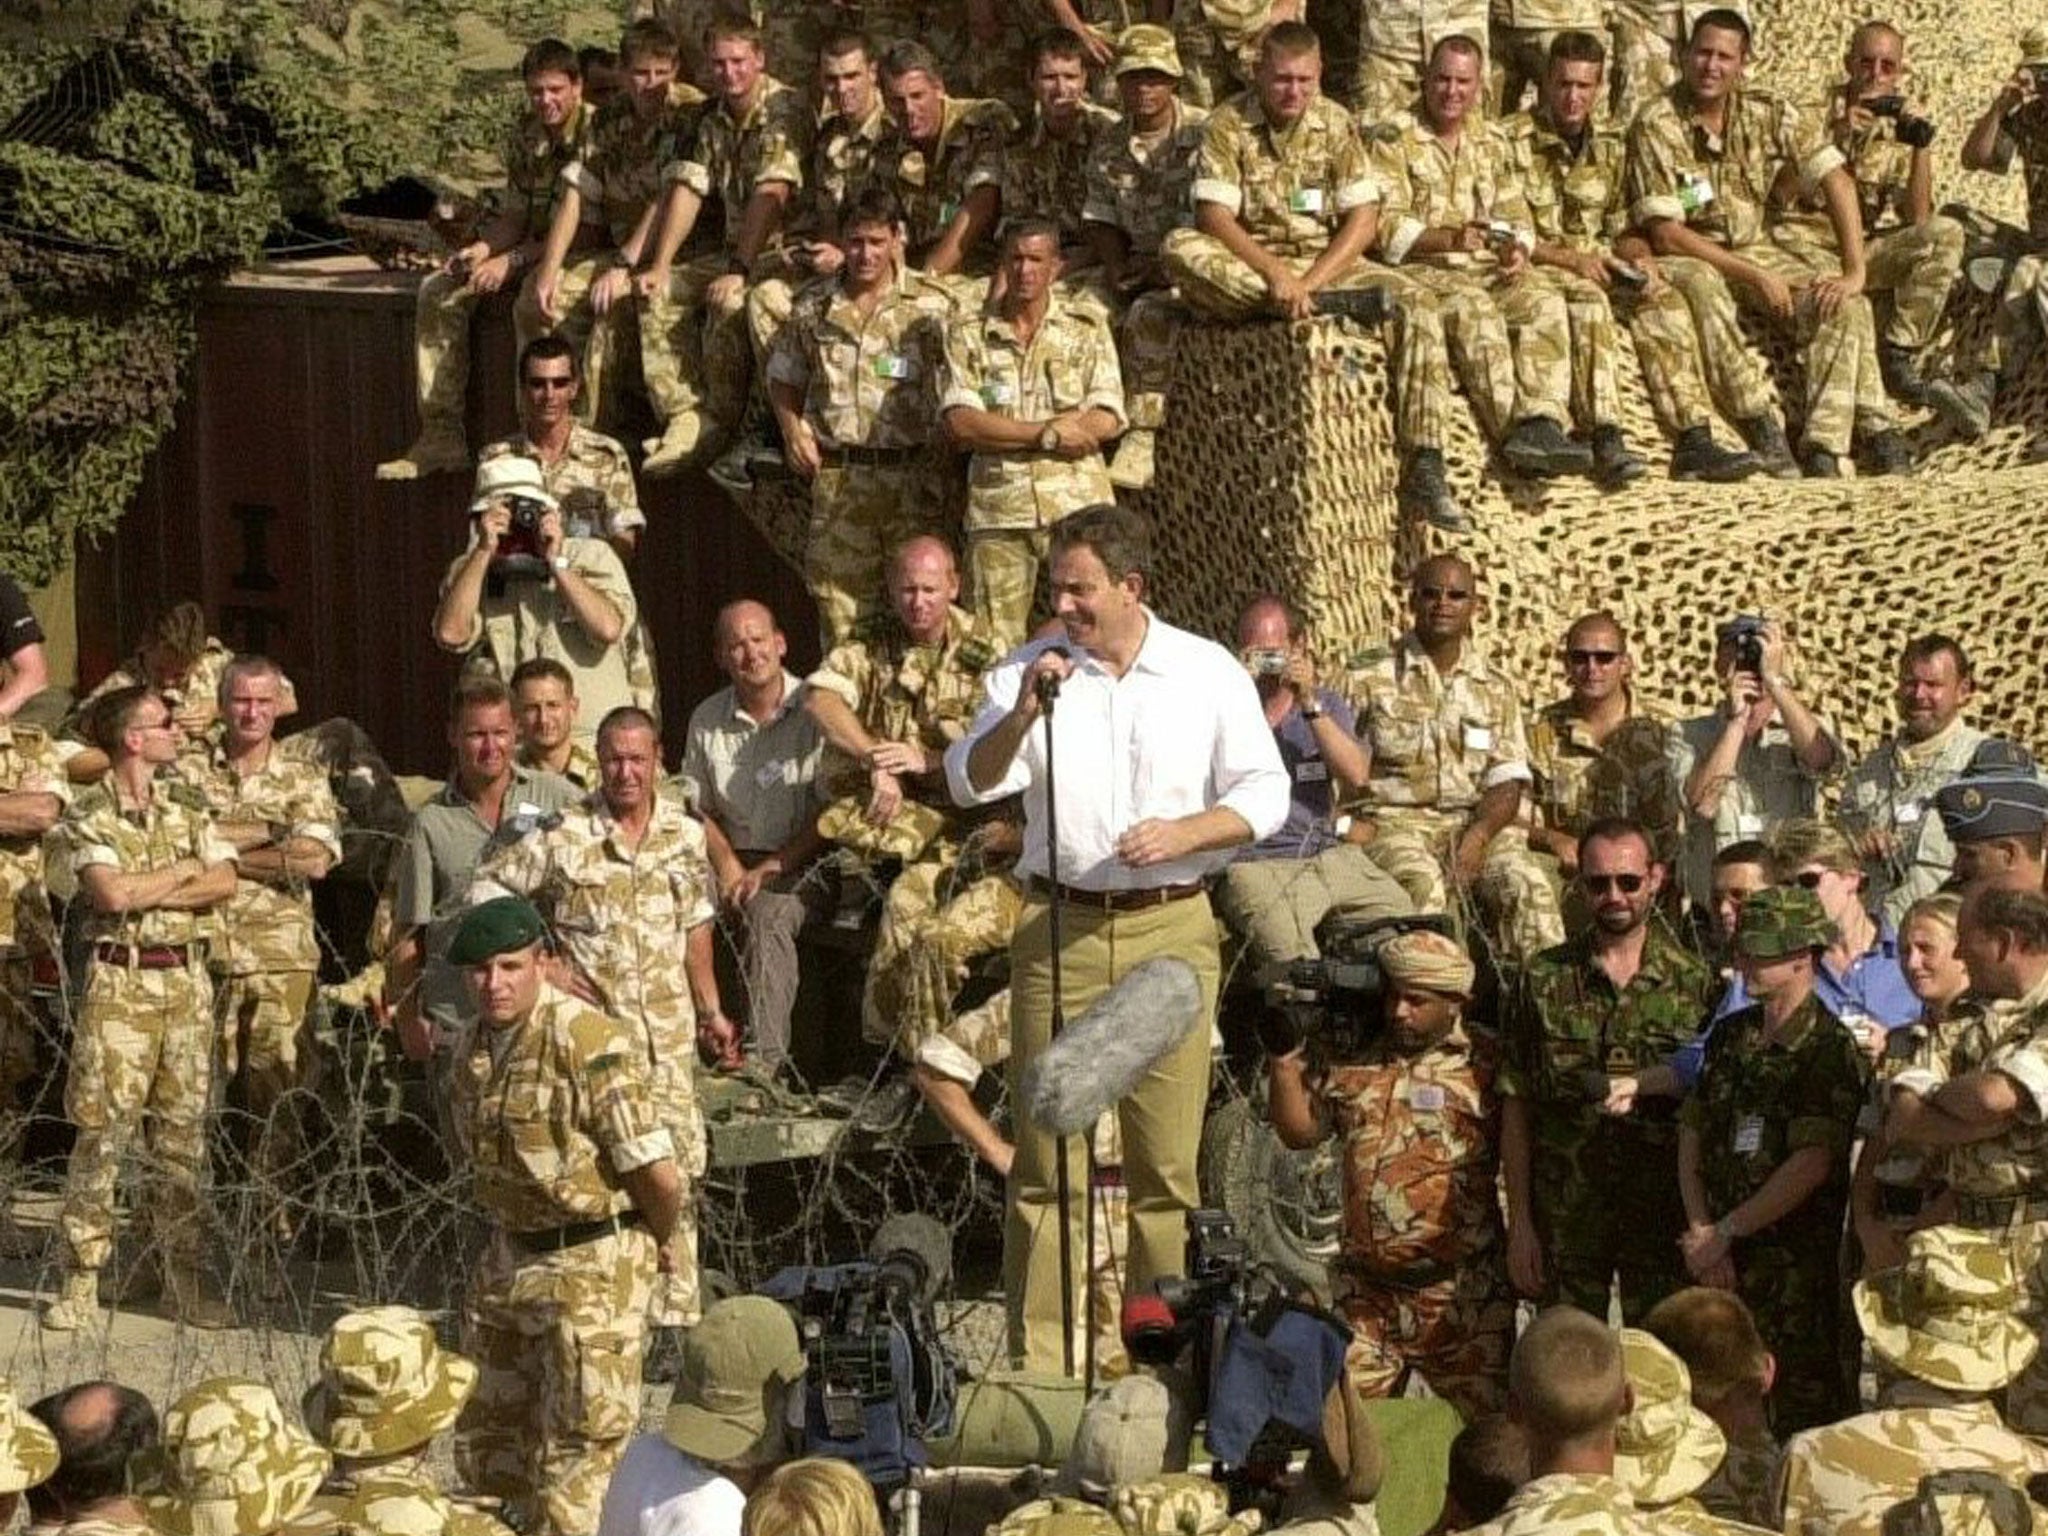 Former Prime Minister Tony Blair, pictured addressing British troops in October 2001